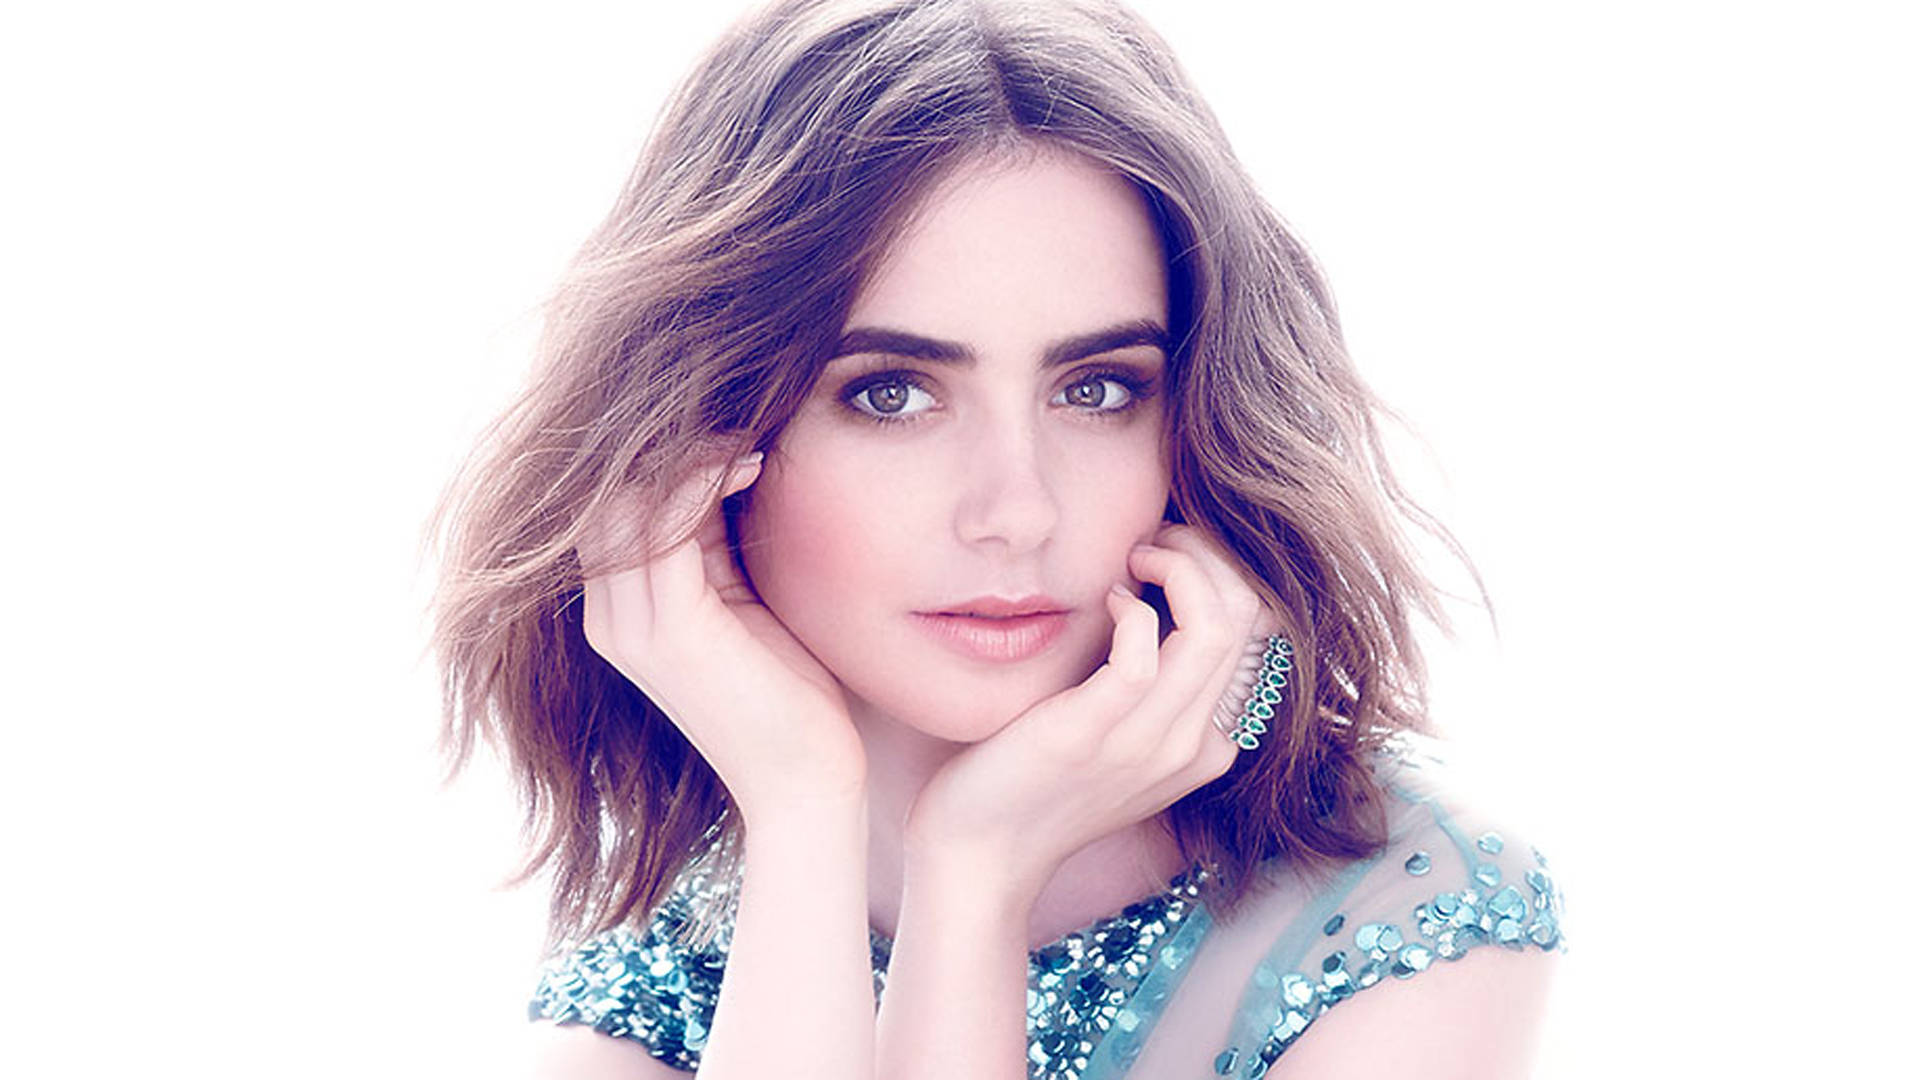 Lily Collins With Short Hair Background